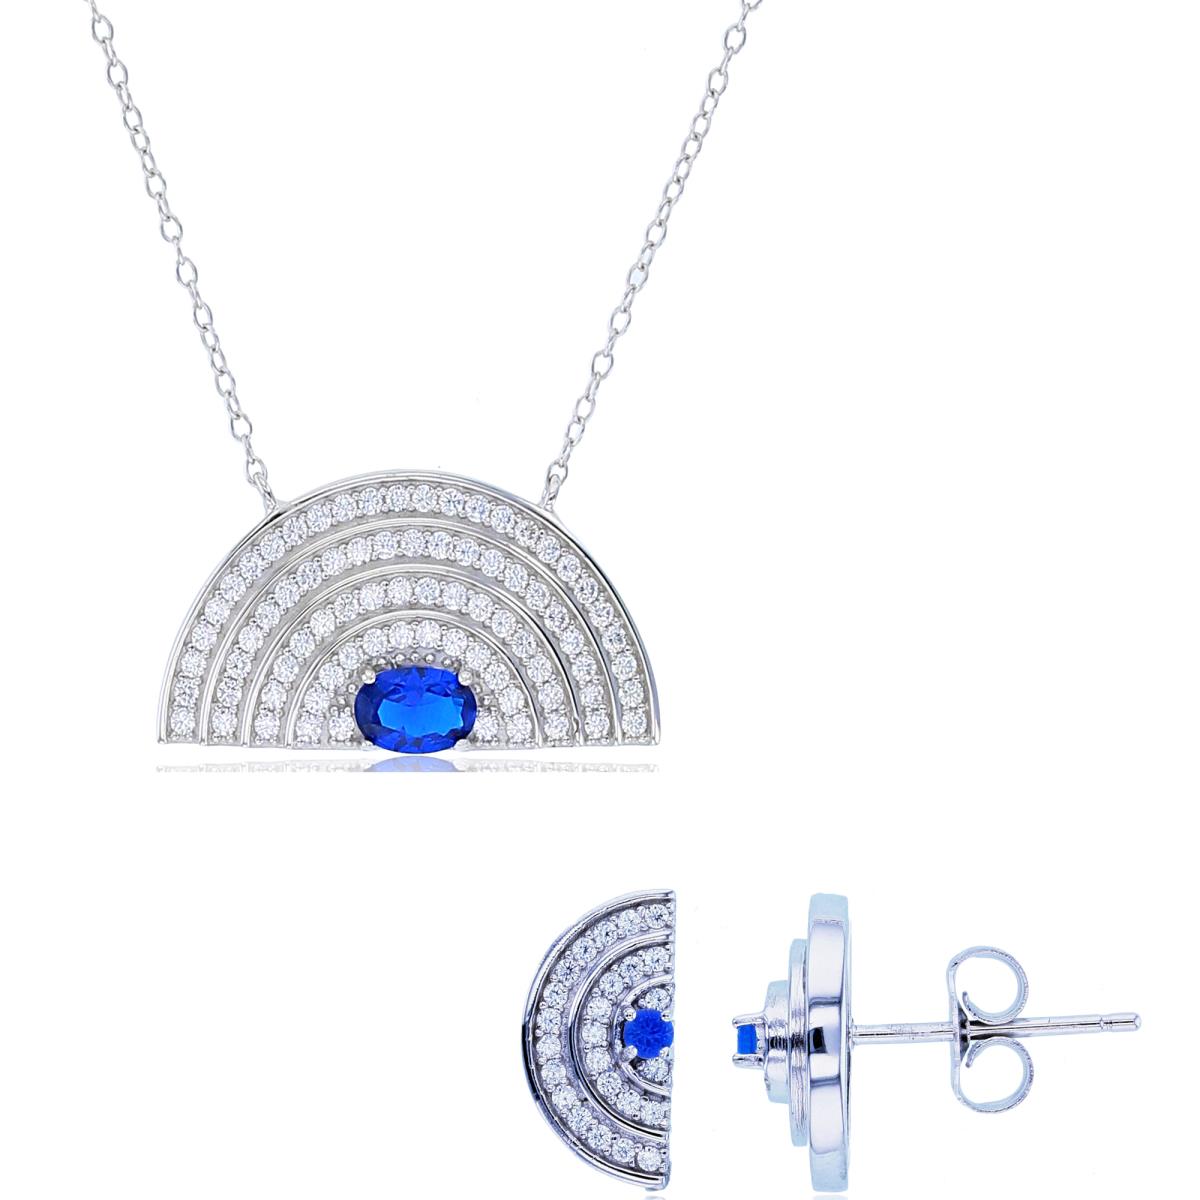 Sterling Silver Rhodium Rd White & 6x4mm Ov #113 Blue Spinel Half Circle 18" Necklace & Earring Set